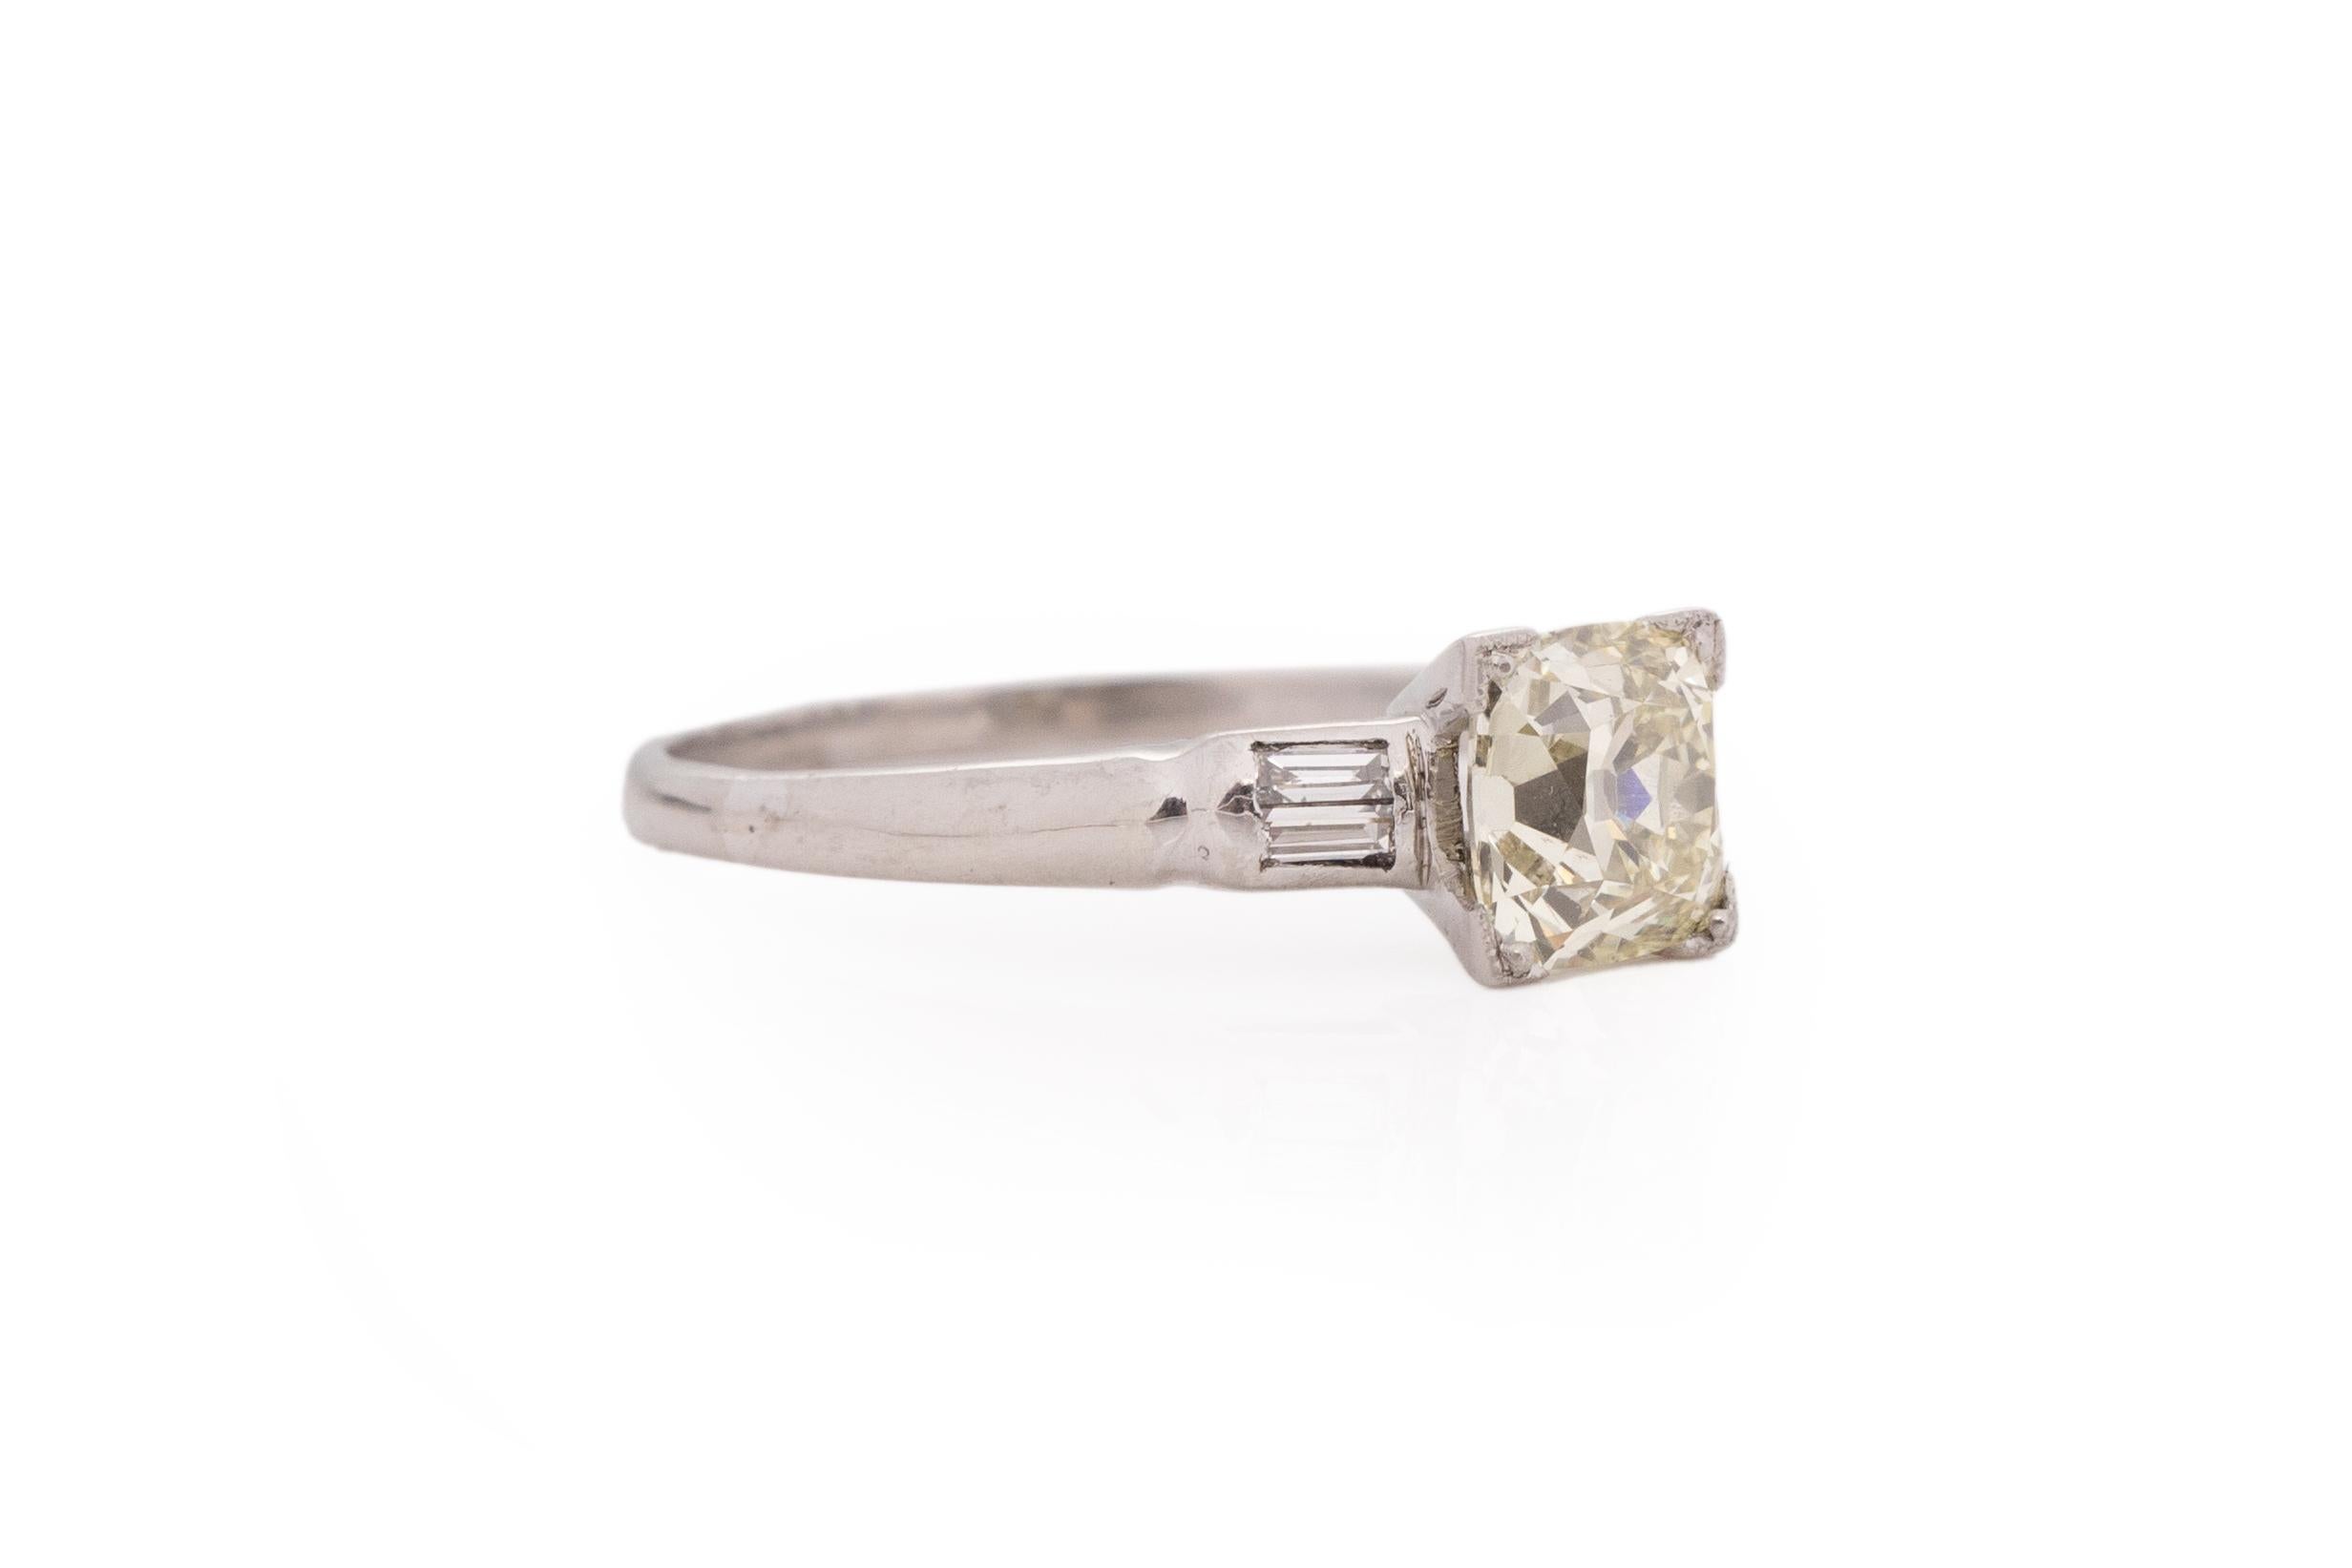 Ring Size: 7
Metal Type: Platinum [Hallmarked, and Tested]
Weight: 2.7 grams

Center Diamond Details:
Weight: 1.21carat
Cut: Antique Cushion
Color: Light Yellow, O/P
Clarity: VS2

Side Stone Details:
Weight: .15carat total weight
Cut: Antique